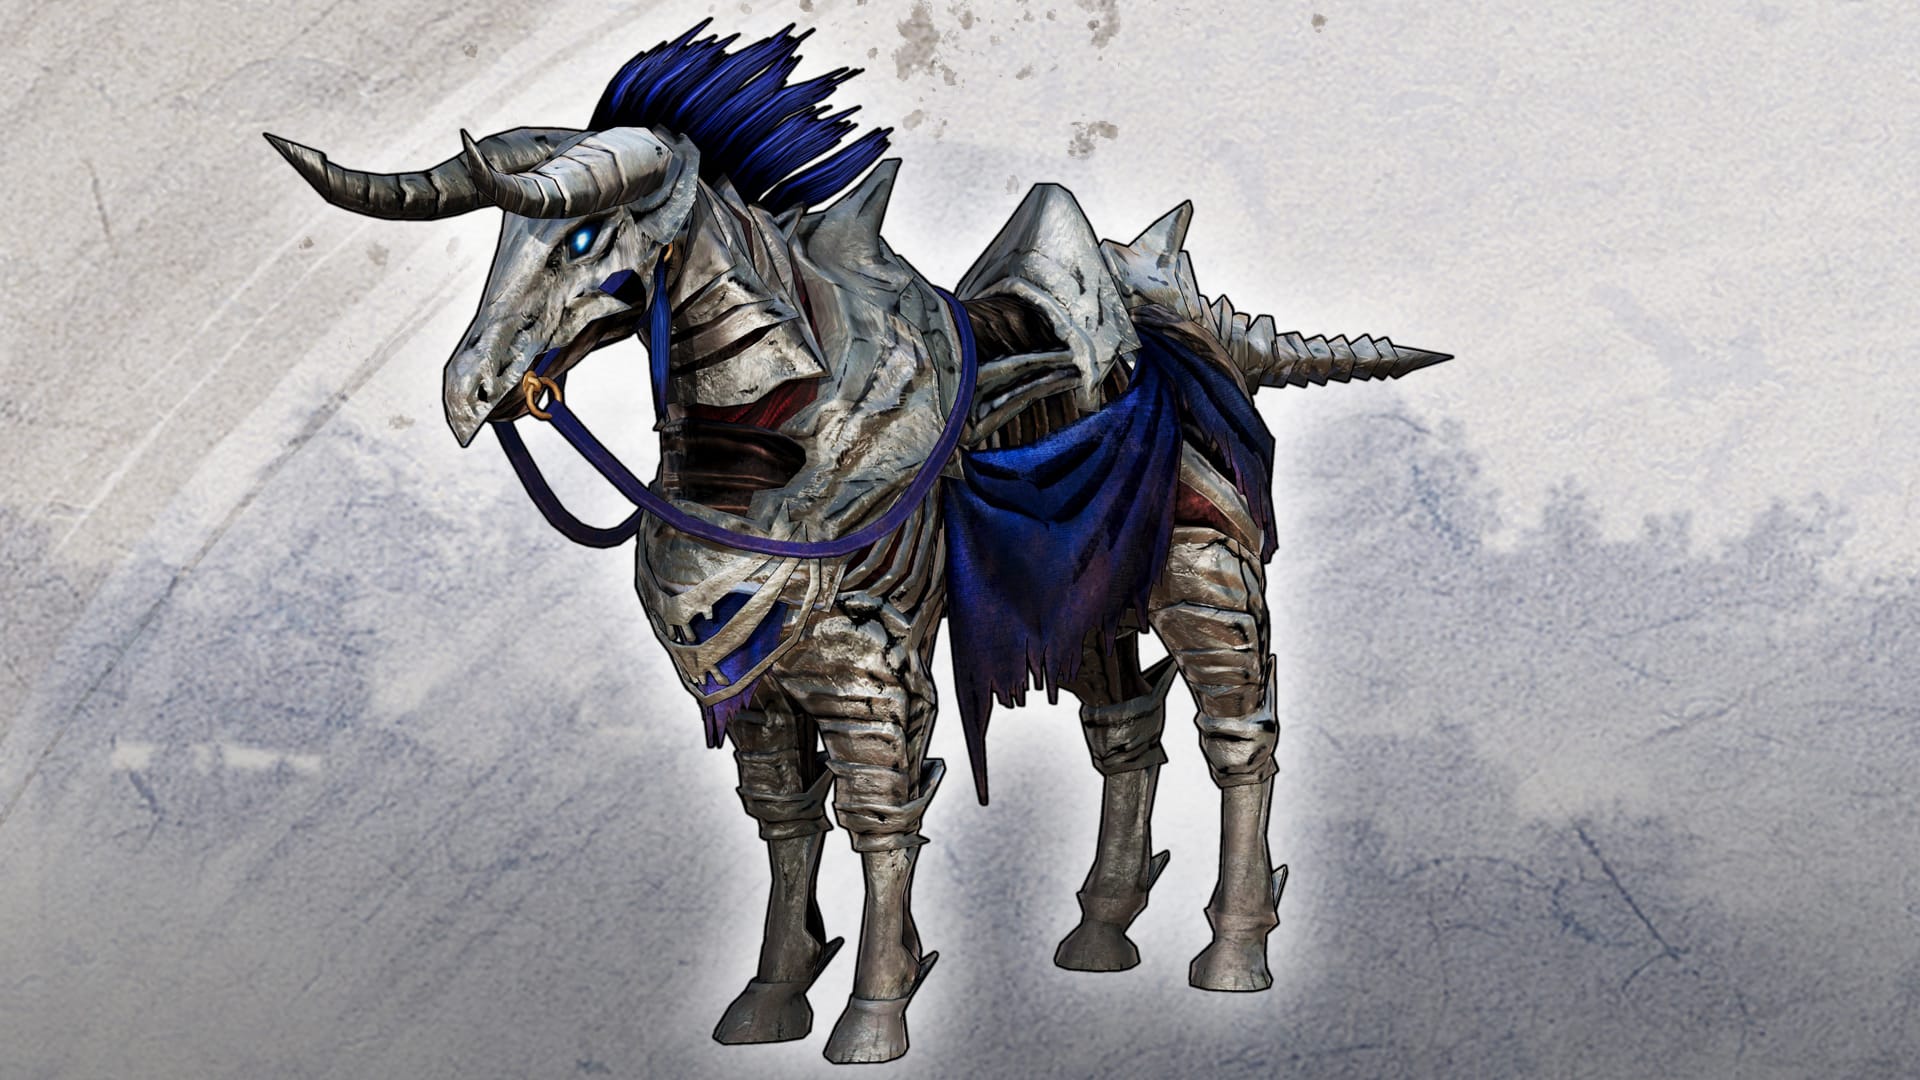 Additional Horse "Ghost"